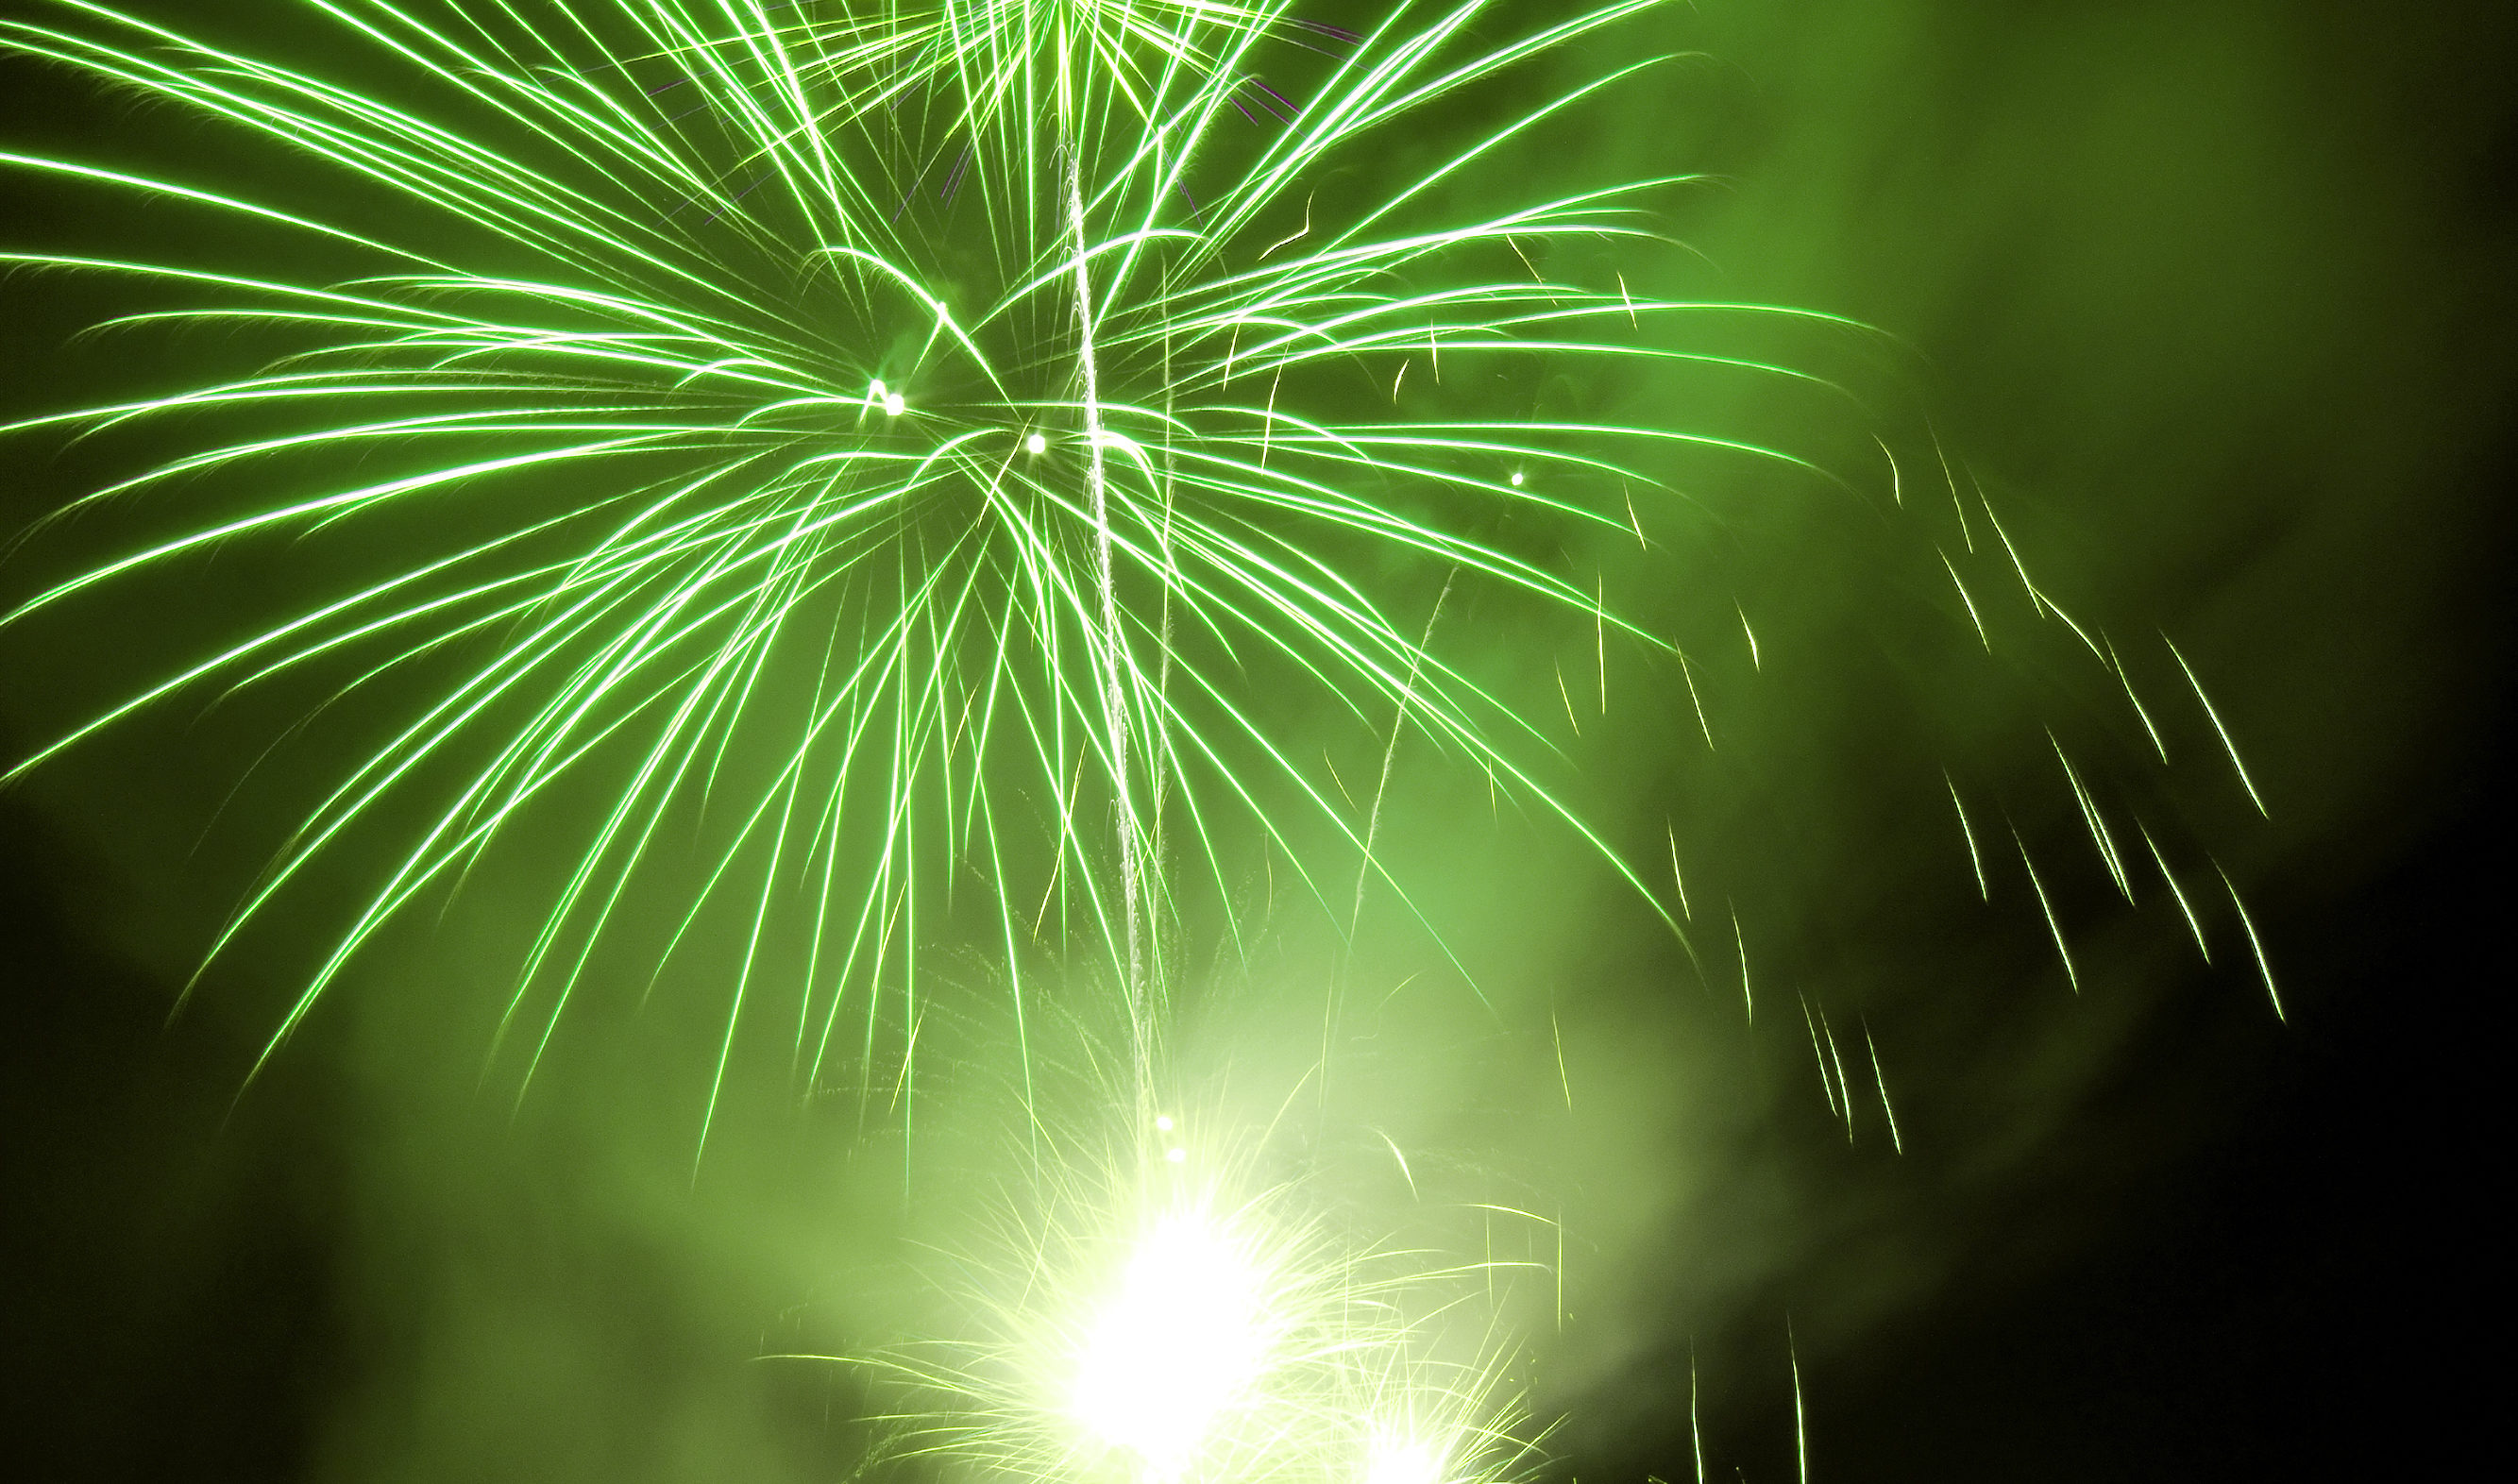 Consumers have been warned to be careful when purchasing fireworks (iStock)